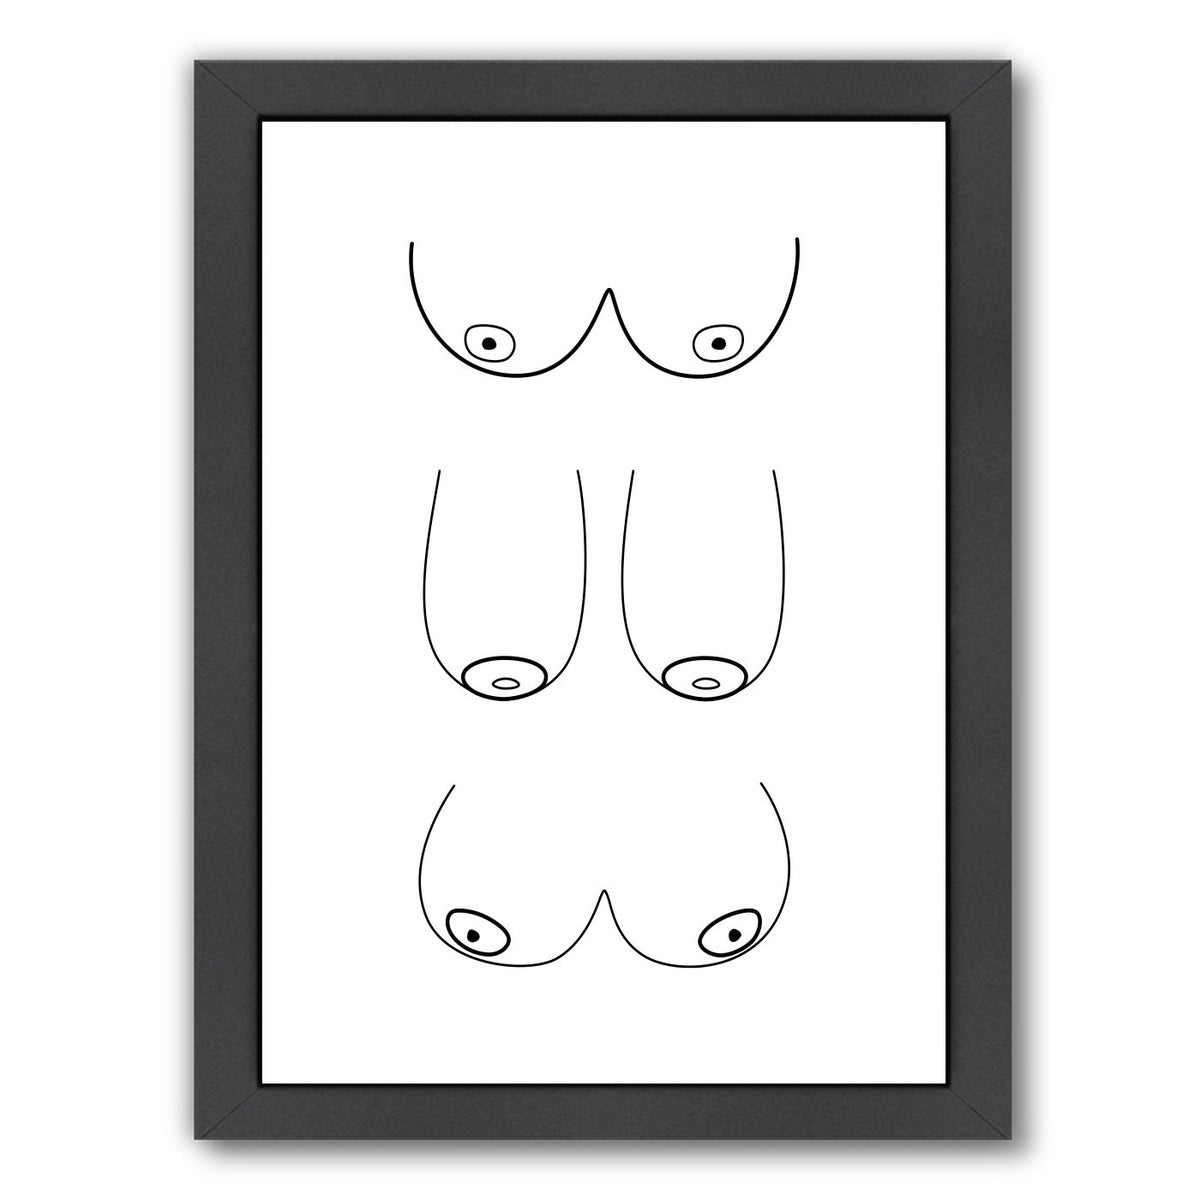 Boobies 3X by Explicit Design Framed Print - Americanflat